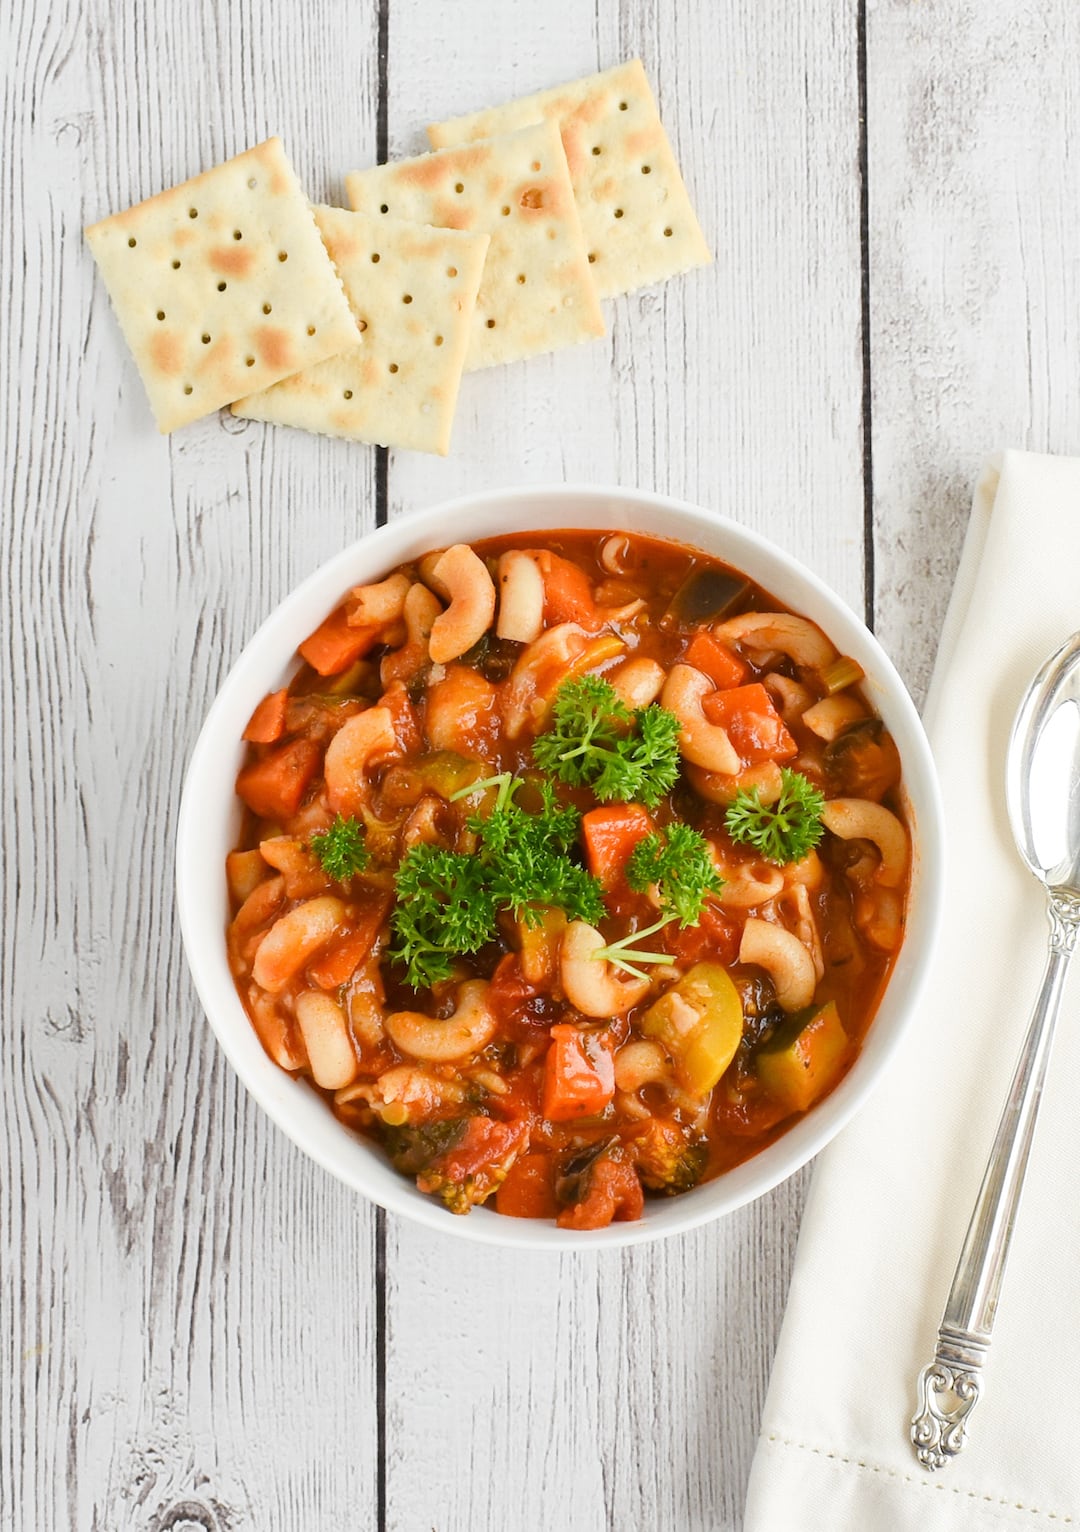 Image of a bowl of minestrone soup on a white washed wood background with crackers on the side